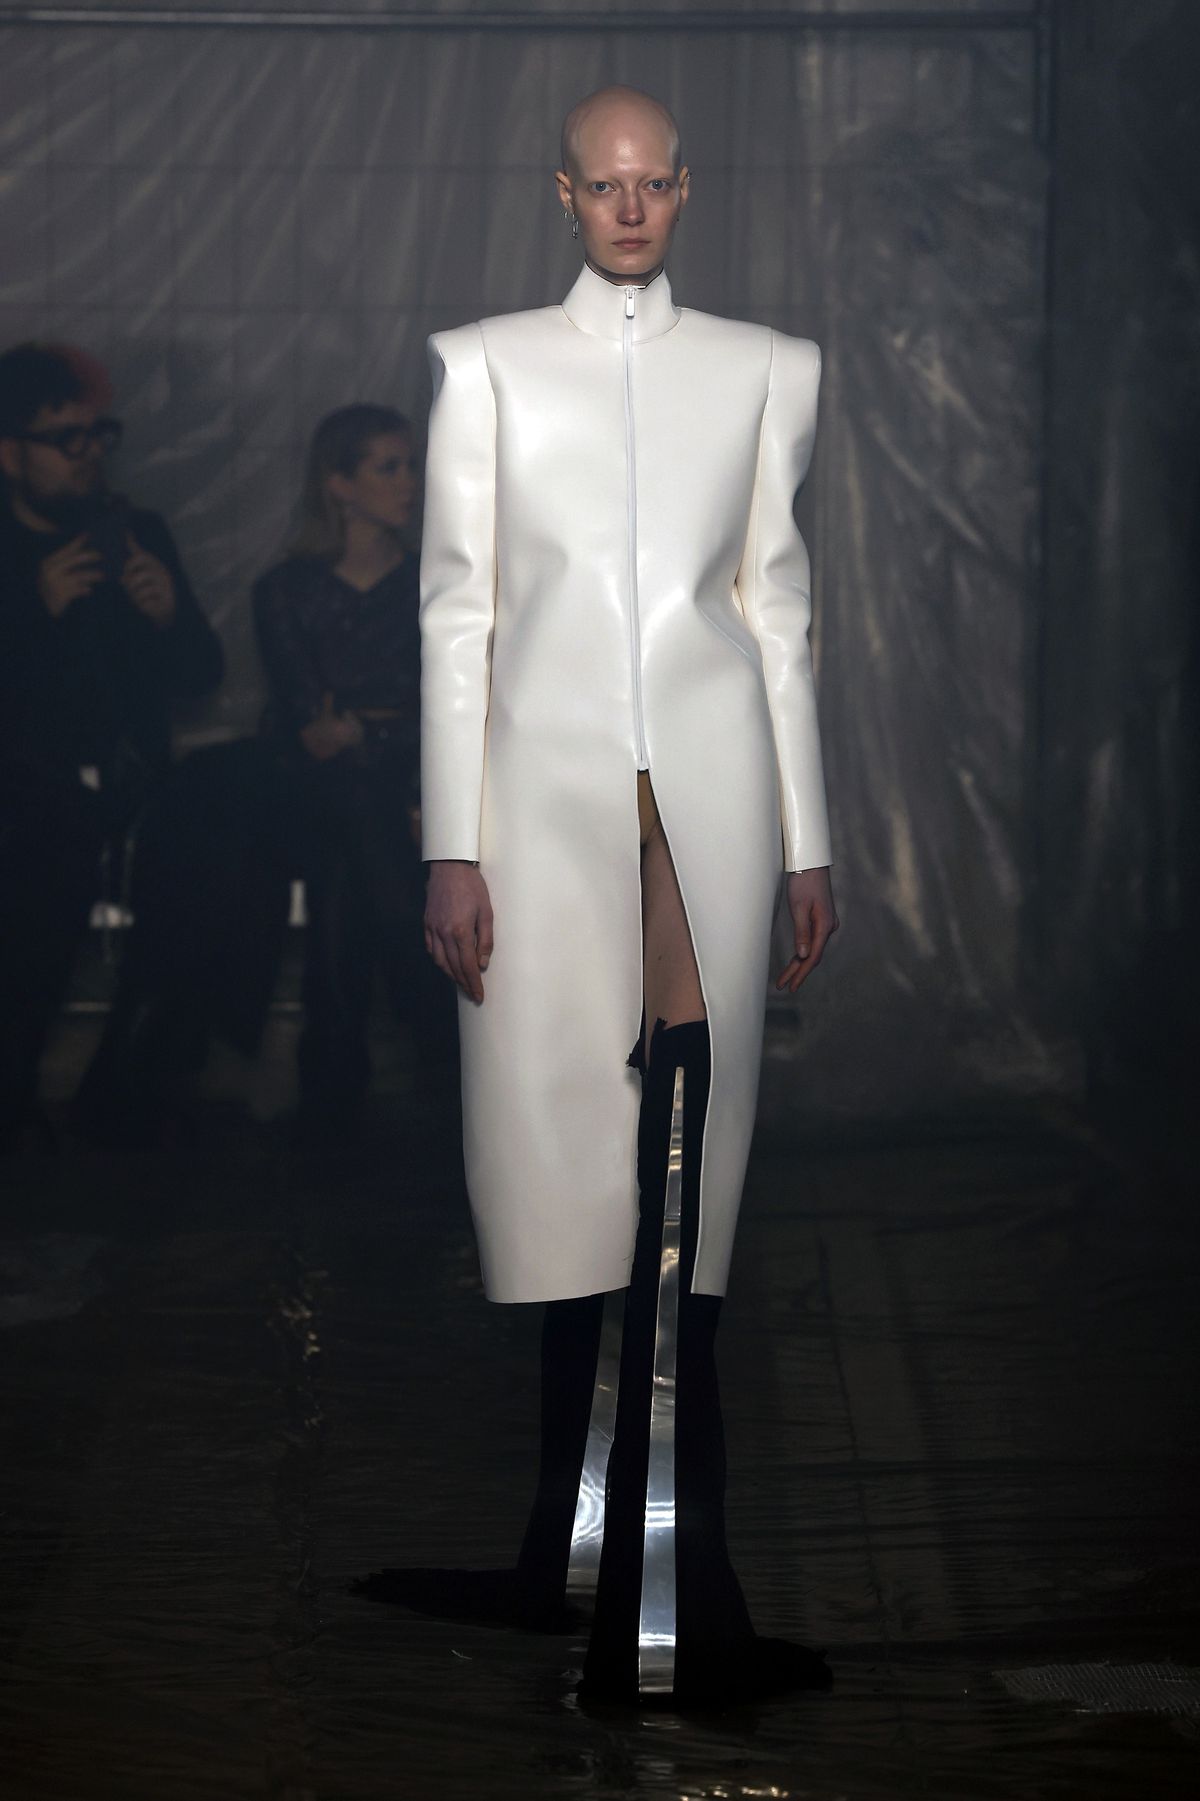 A model wearing a long white leather coat and heels with sword-like protrusions walks the runway at the Han Kjobenhavn fashion show at Milan Fashion Week.